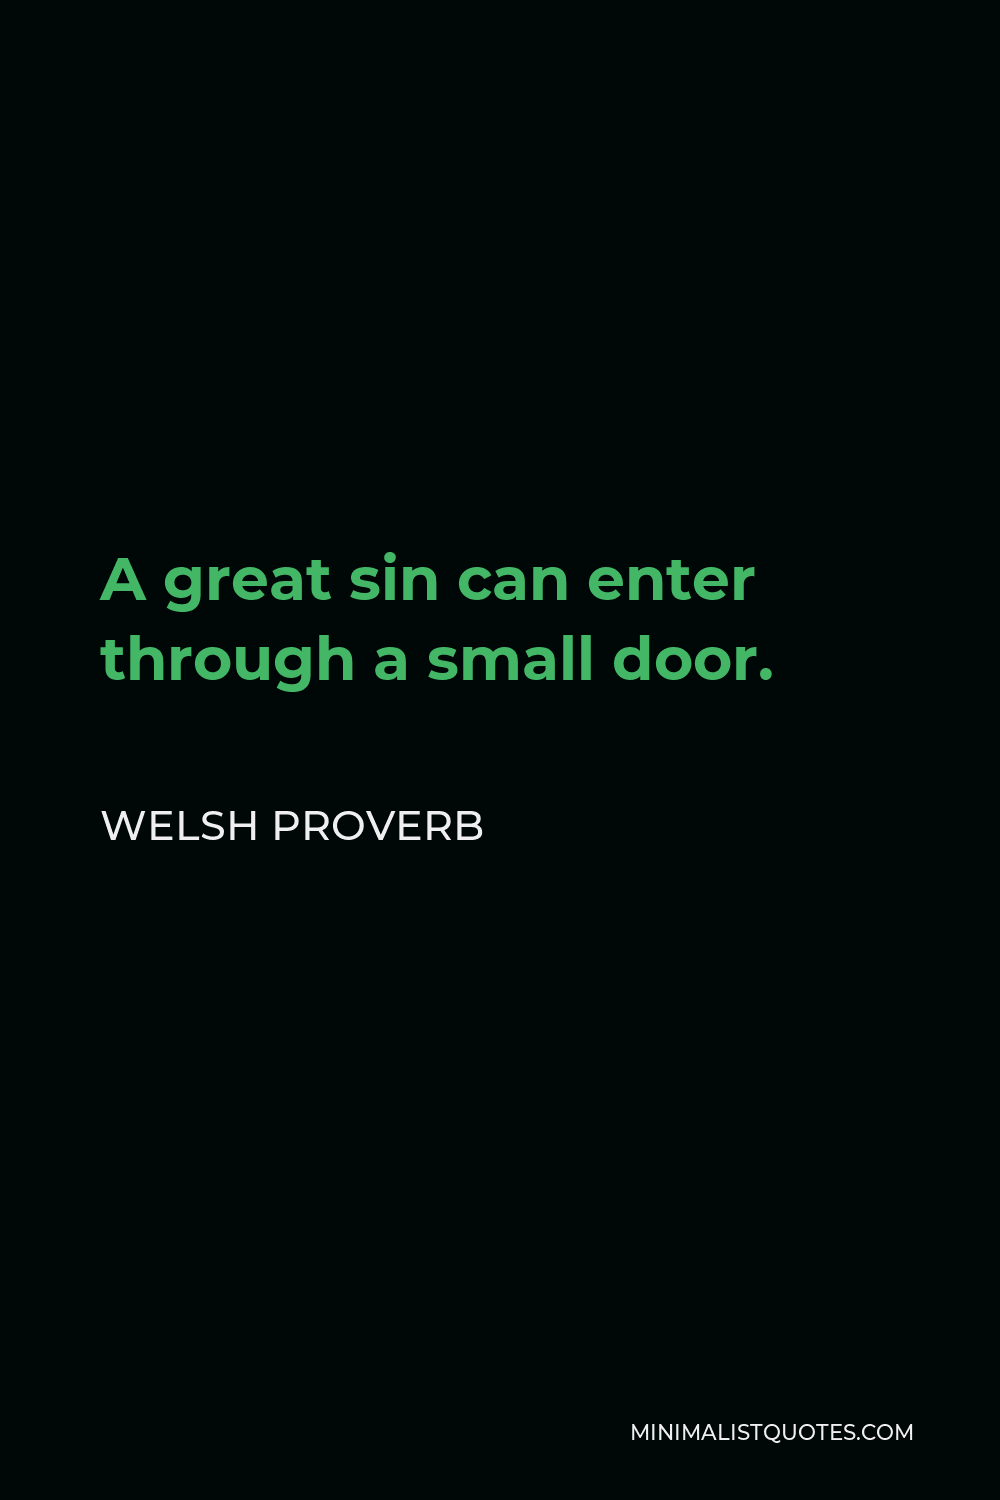 Welsh Proverb Quote - A great sin can enter through a small door.